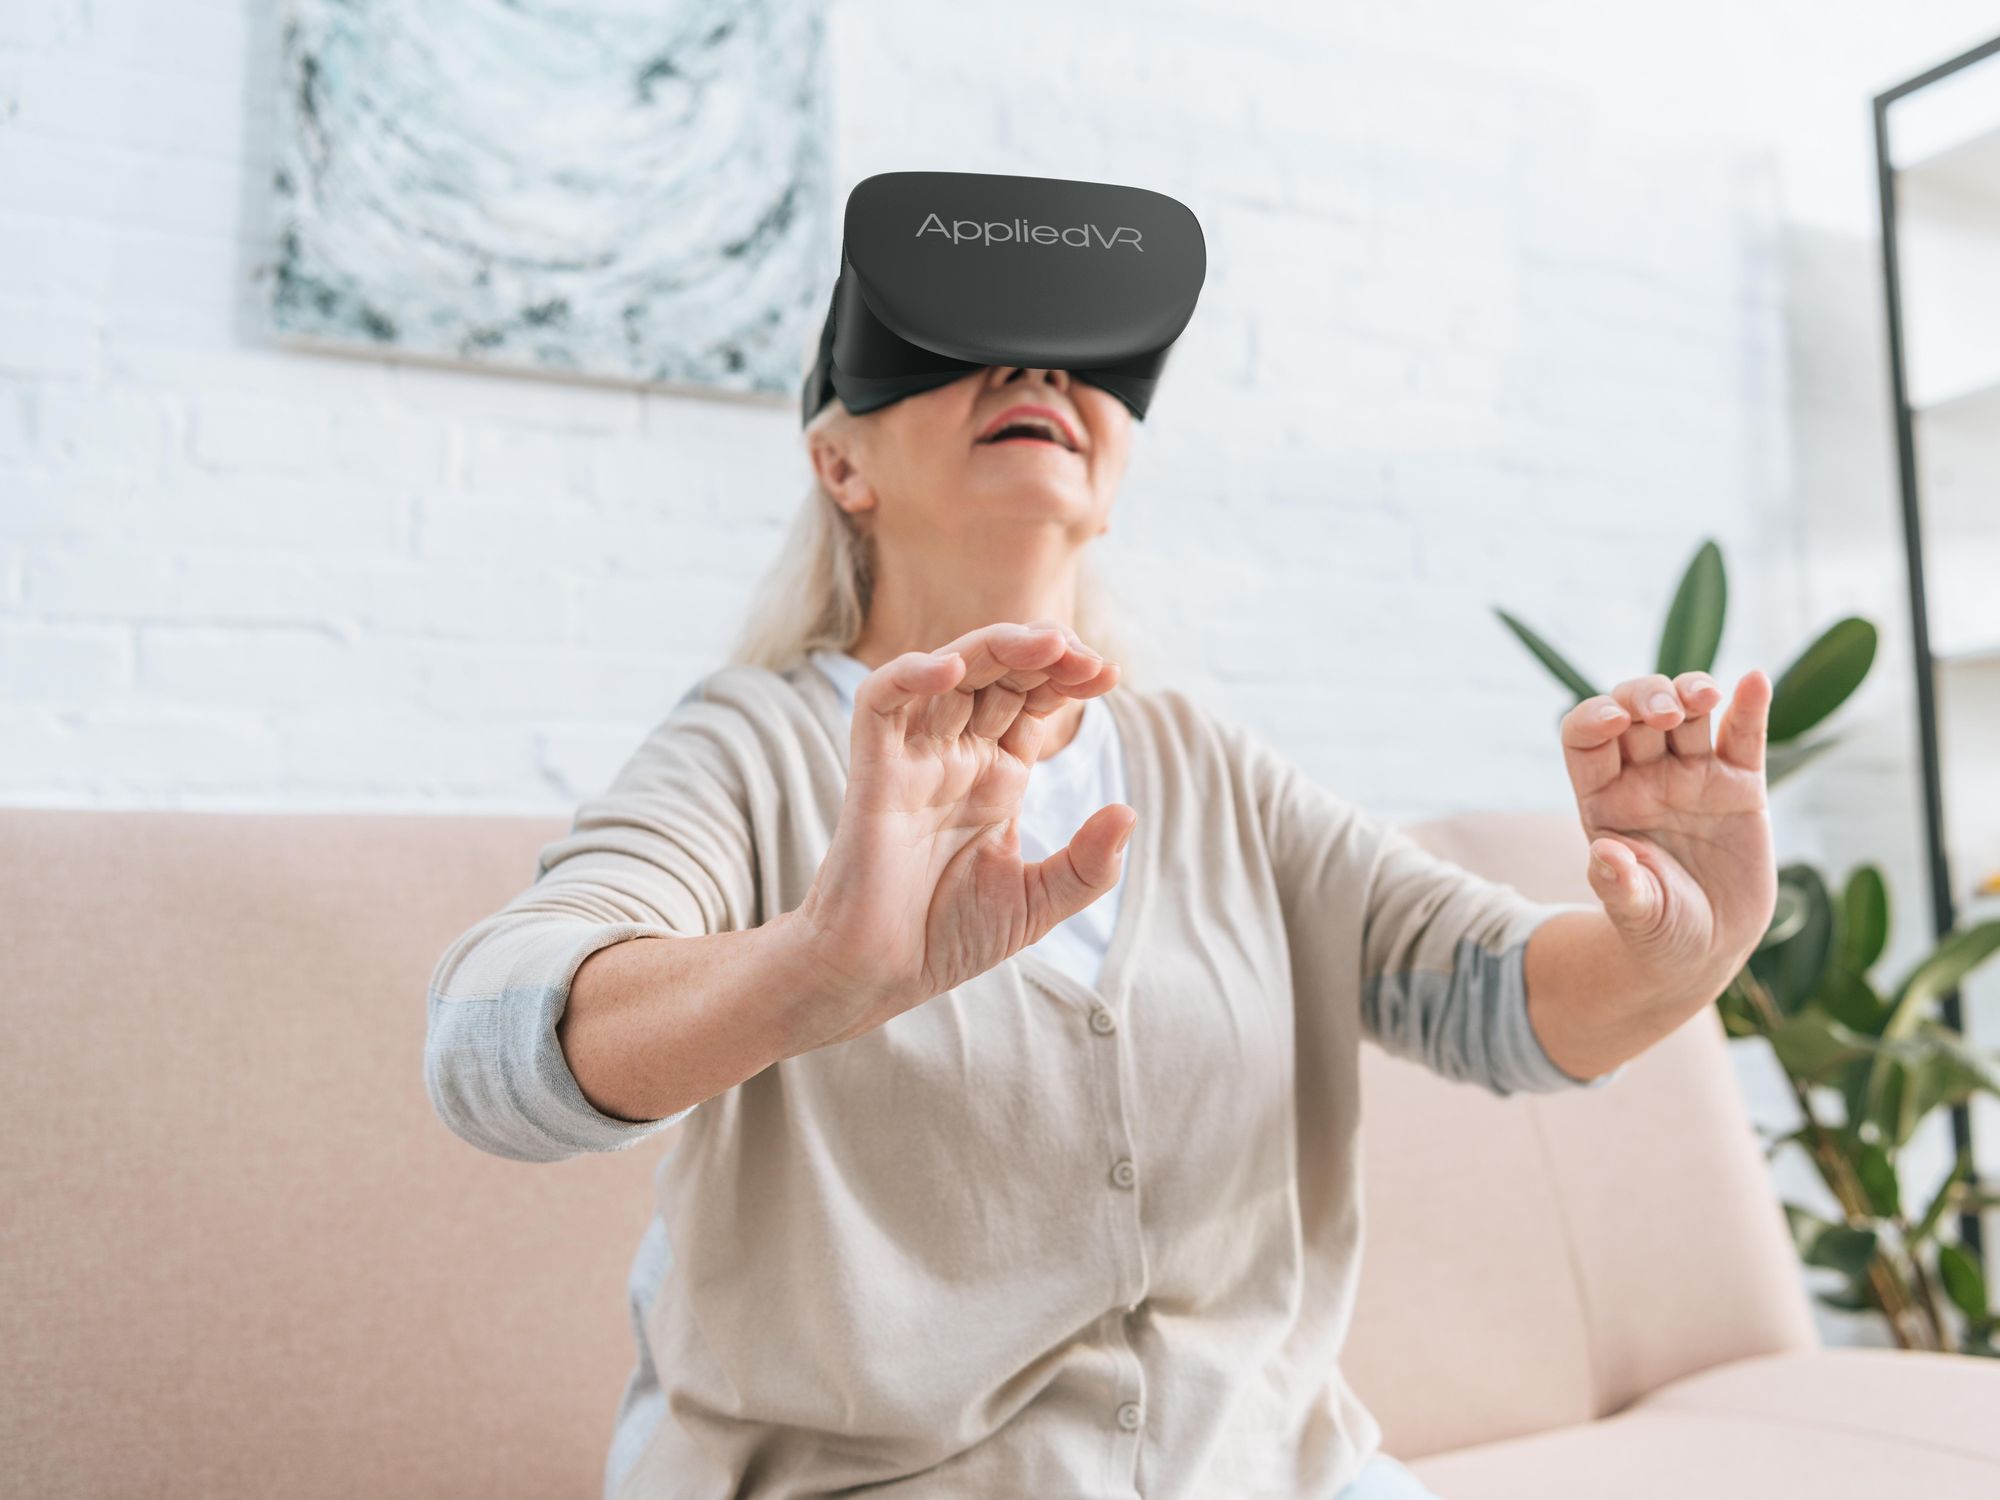 This Startup Made a VR Experience to Reduce Chronic Pain